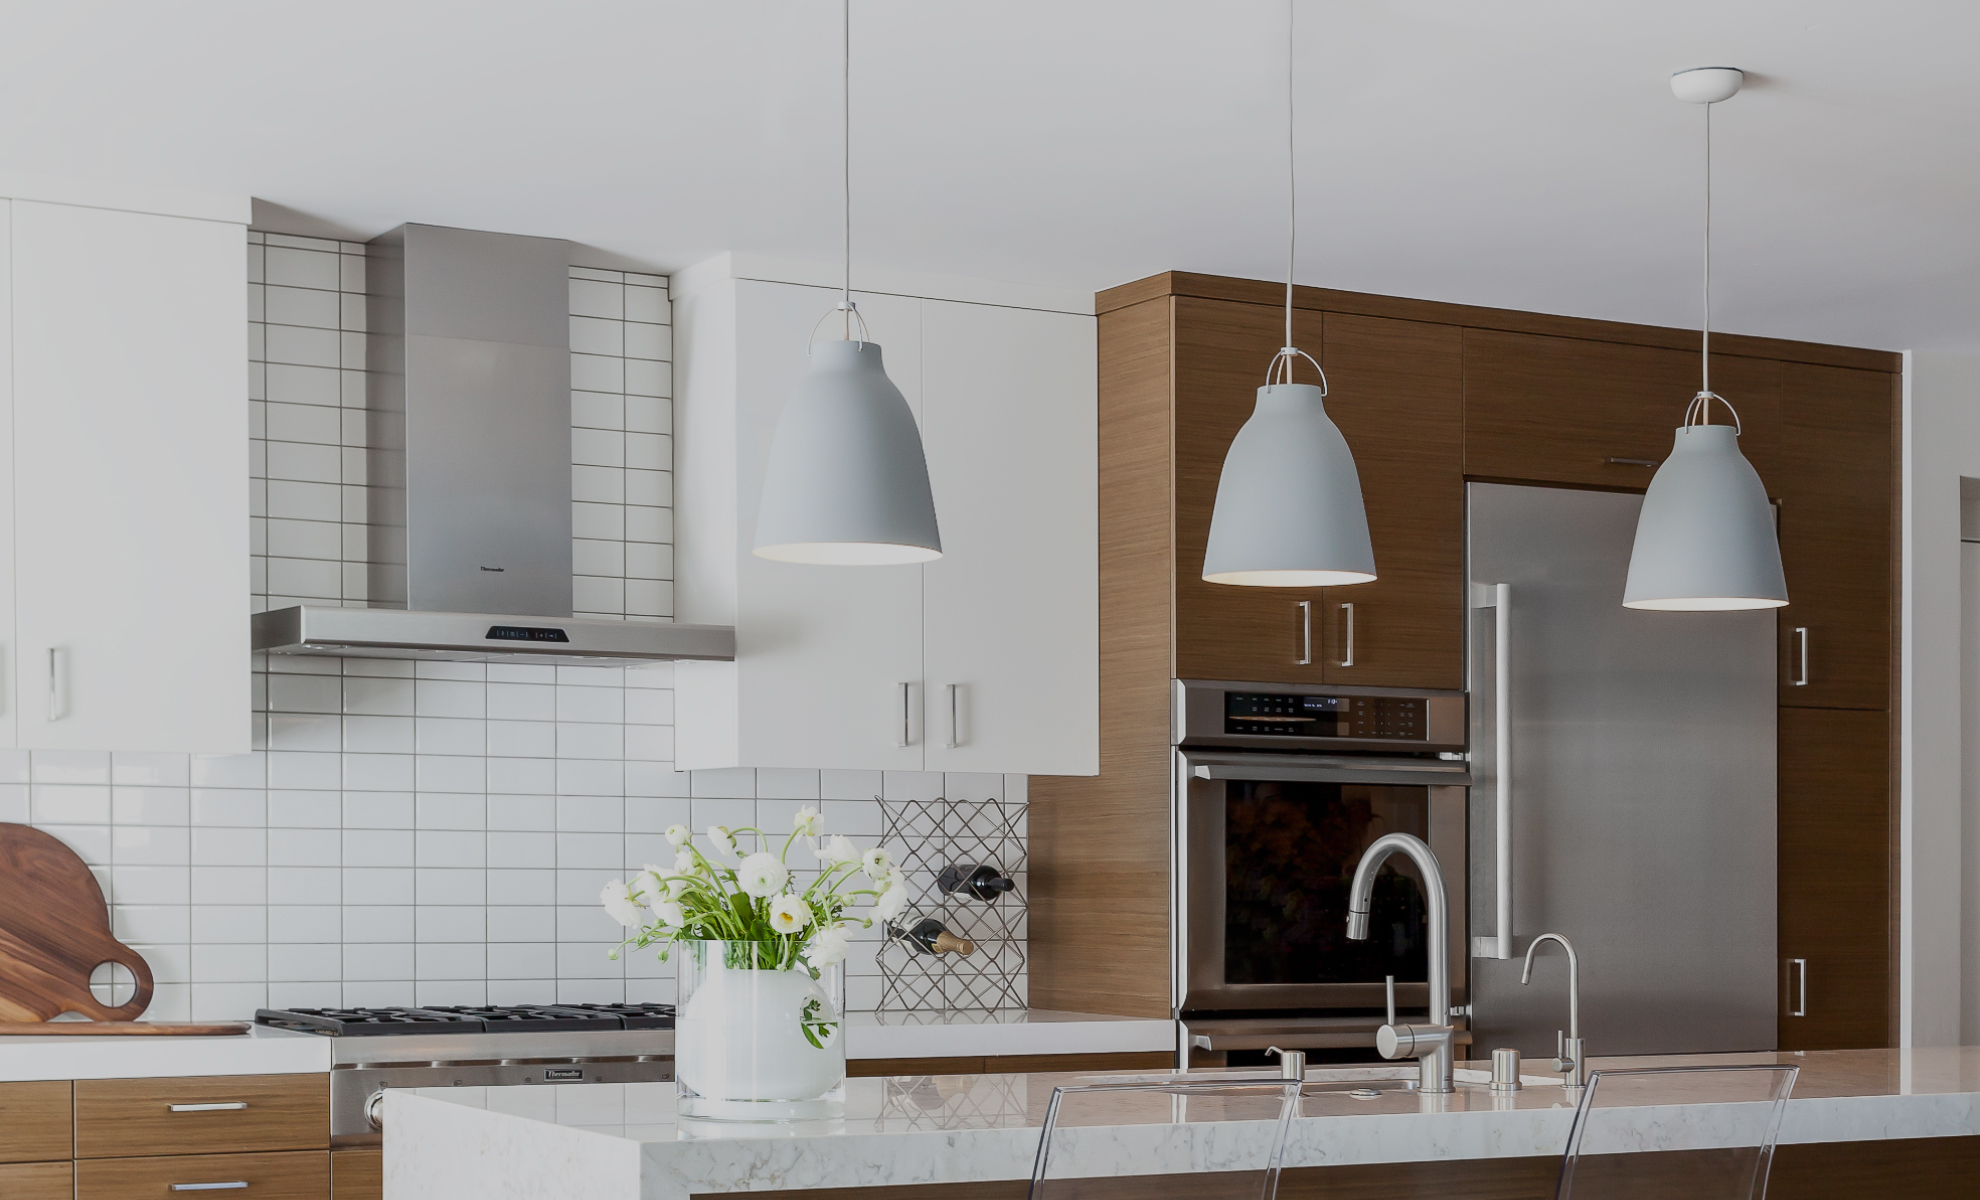 kitchen pendant lighting buyeru0027s guide: how to choose track and monorail lighting NRJTRMT